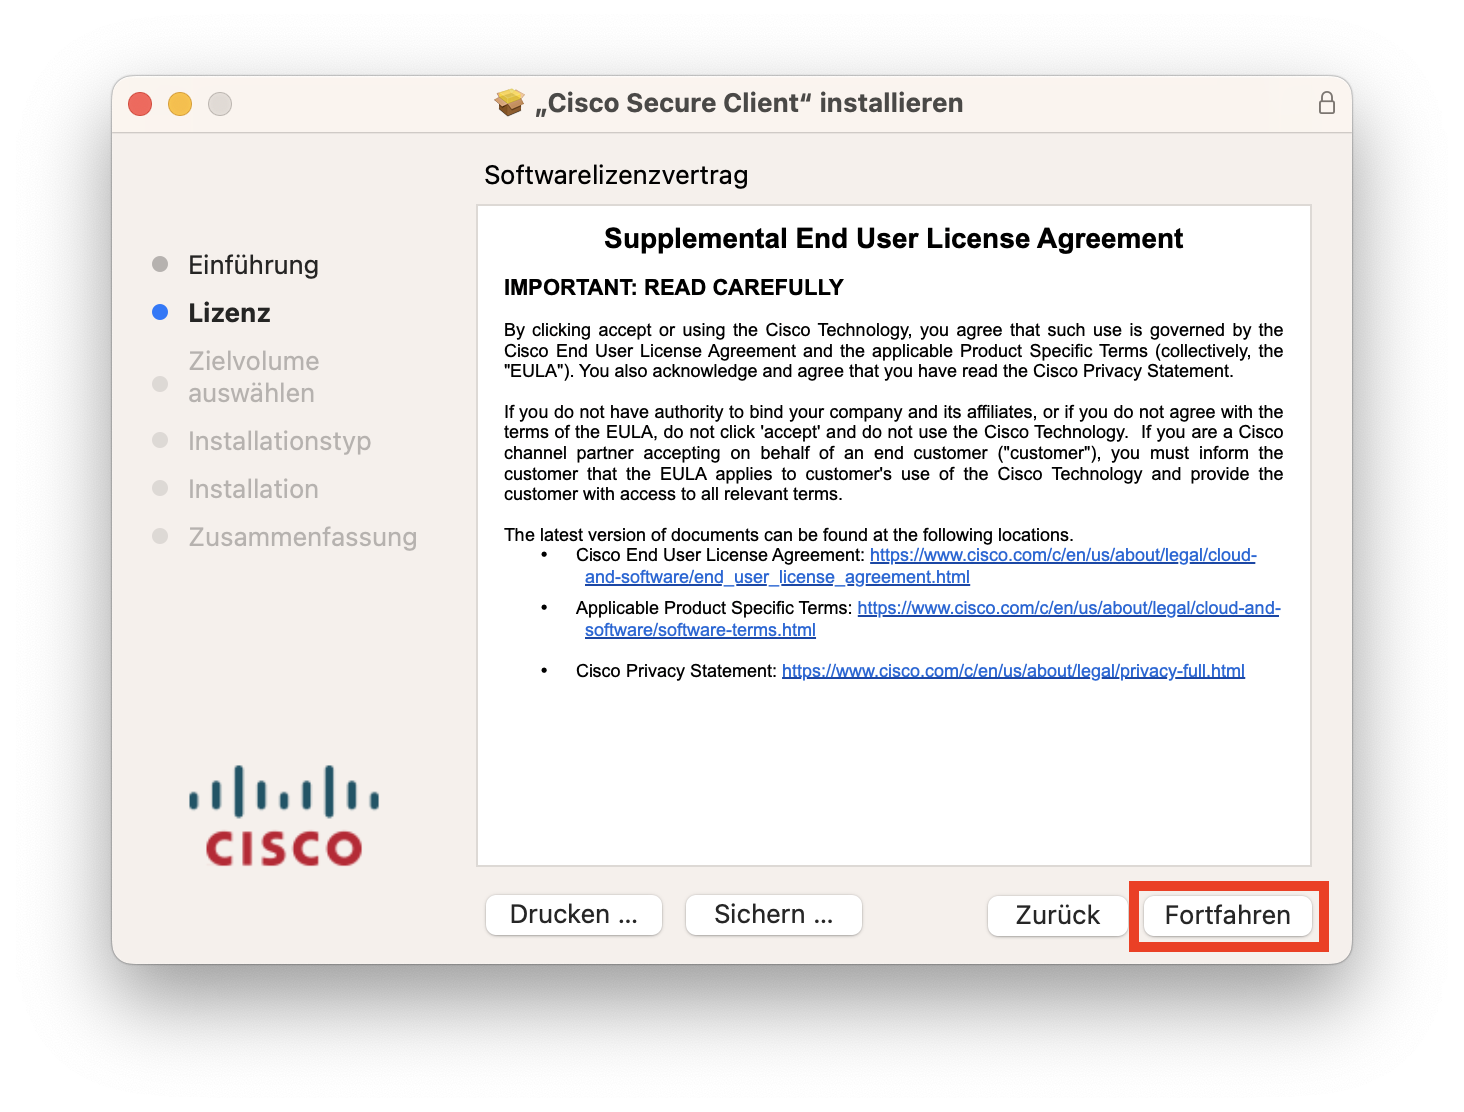 5. Accepting the License Agreement